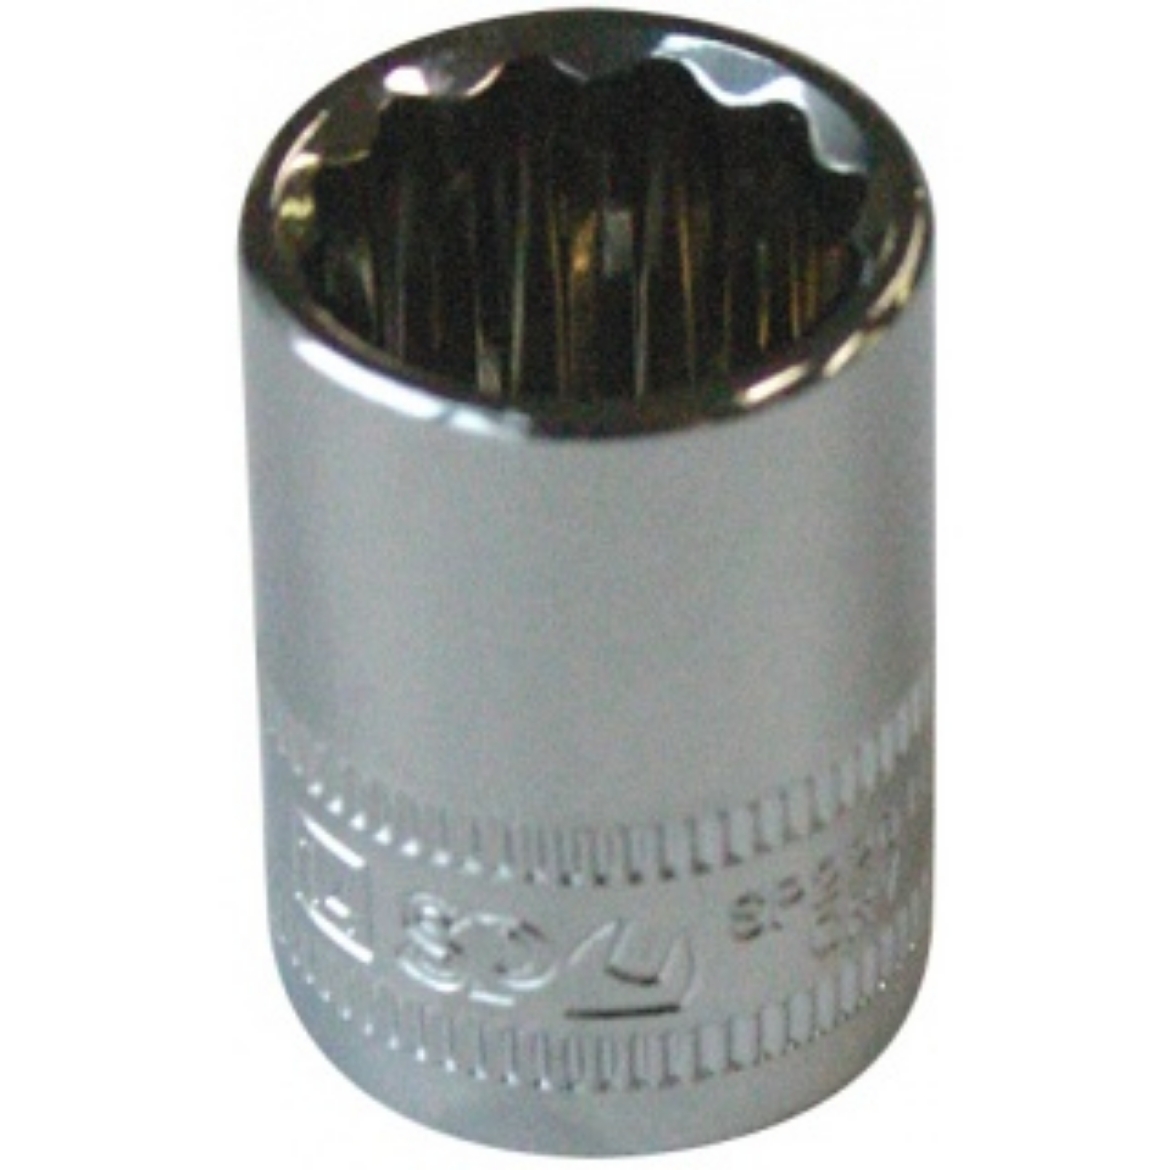 Picture of SOCKET 3/8"DR 12PT METRIC 19MM SP TOOLS